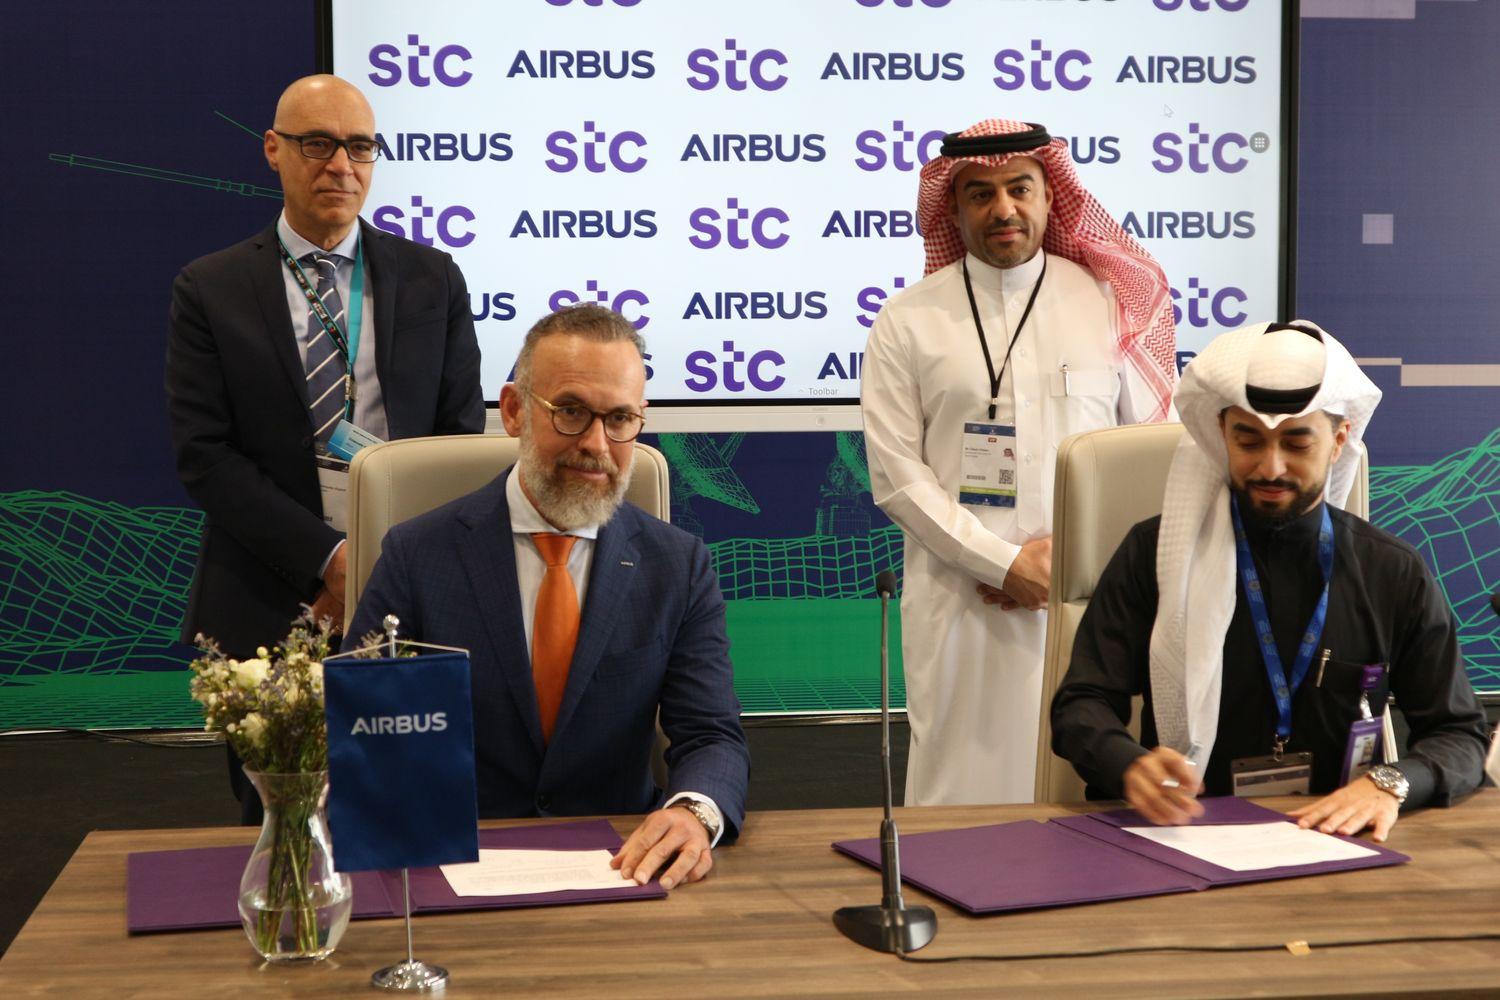 WDS: Airbus Signs MoU with stc for Communication Solutions